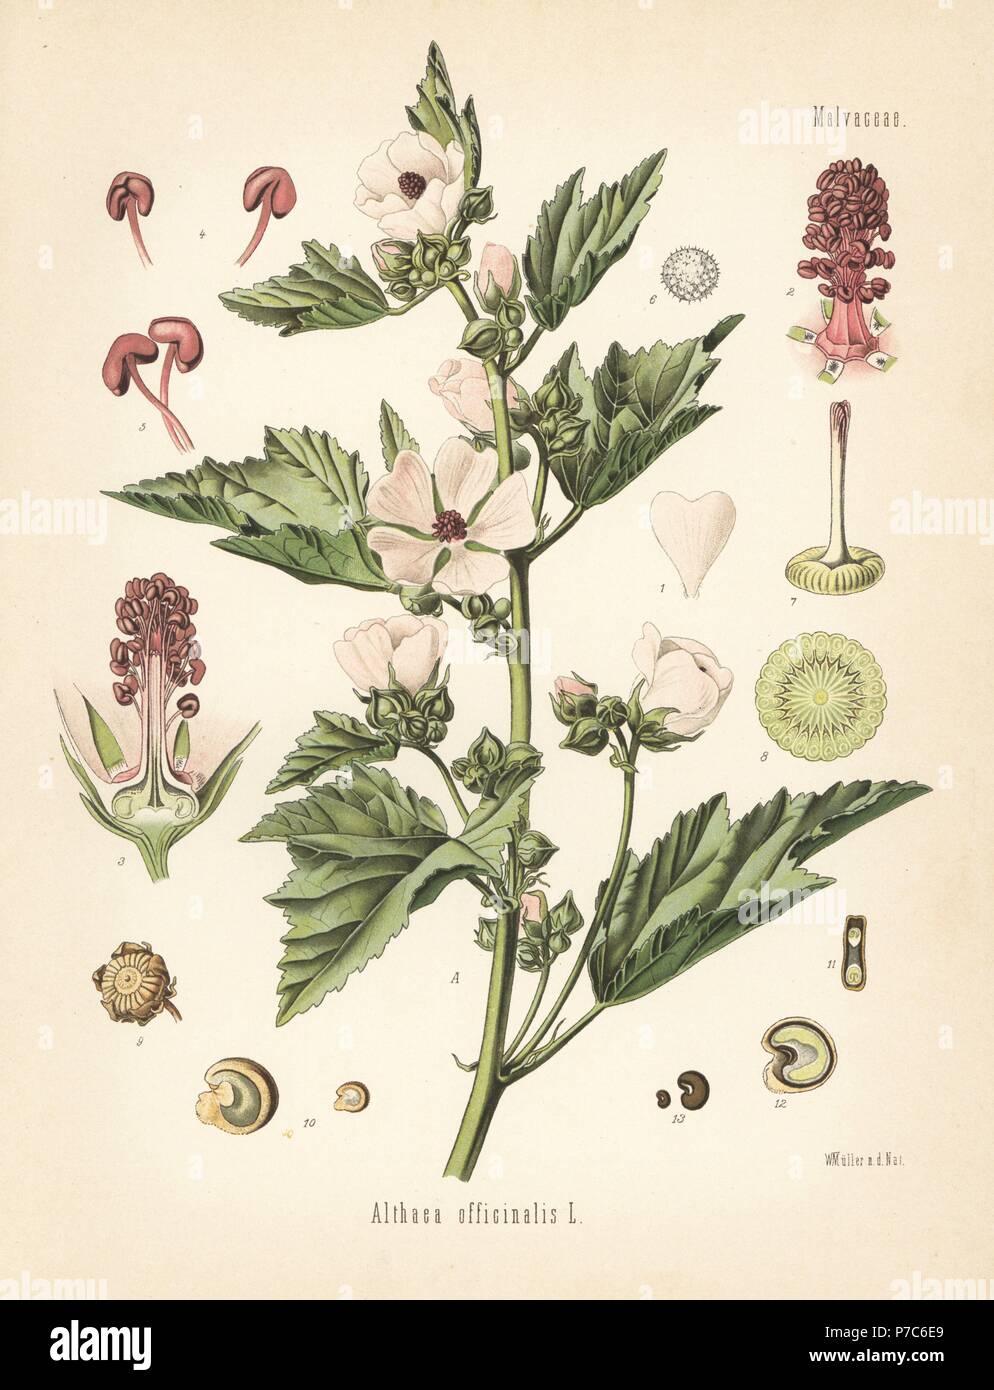 Marshmallow, Althaea officinalis. Chromolithograph after a botanical illustration by Walther Muller from Hermann Adolph Koehler's Medicinal Plants, edited by Gustav Pabst, Koehler, Germany, 1887. Stock Photo